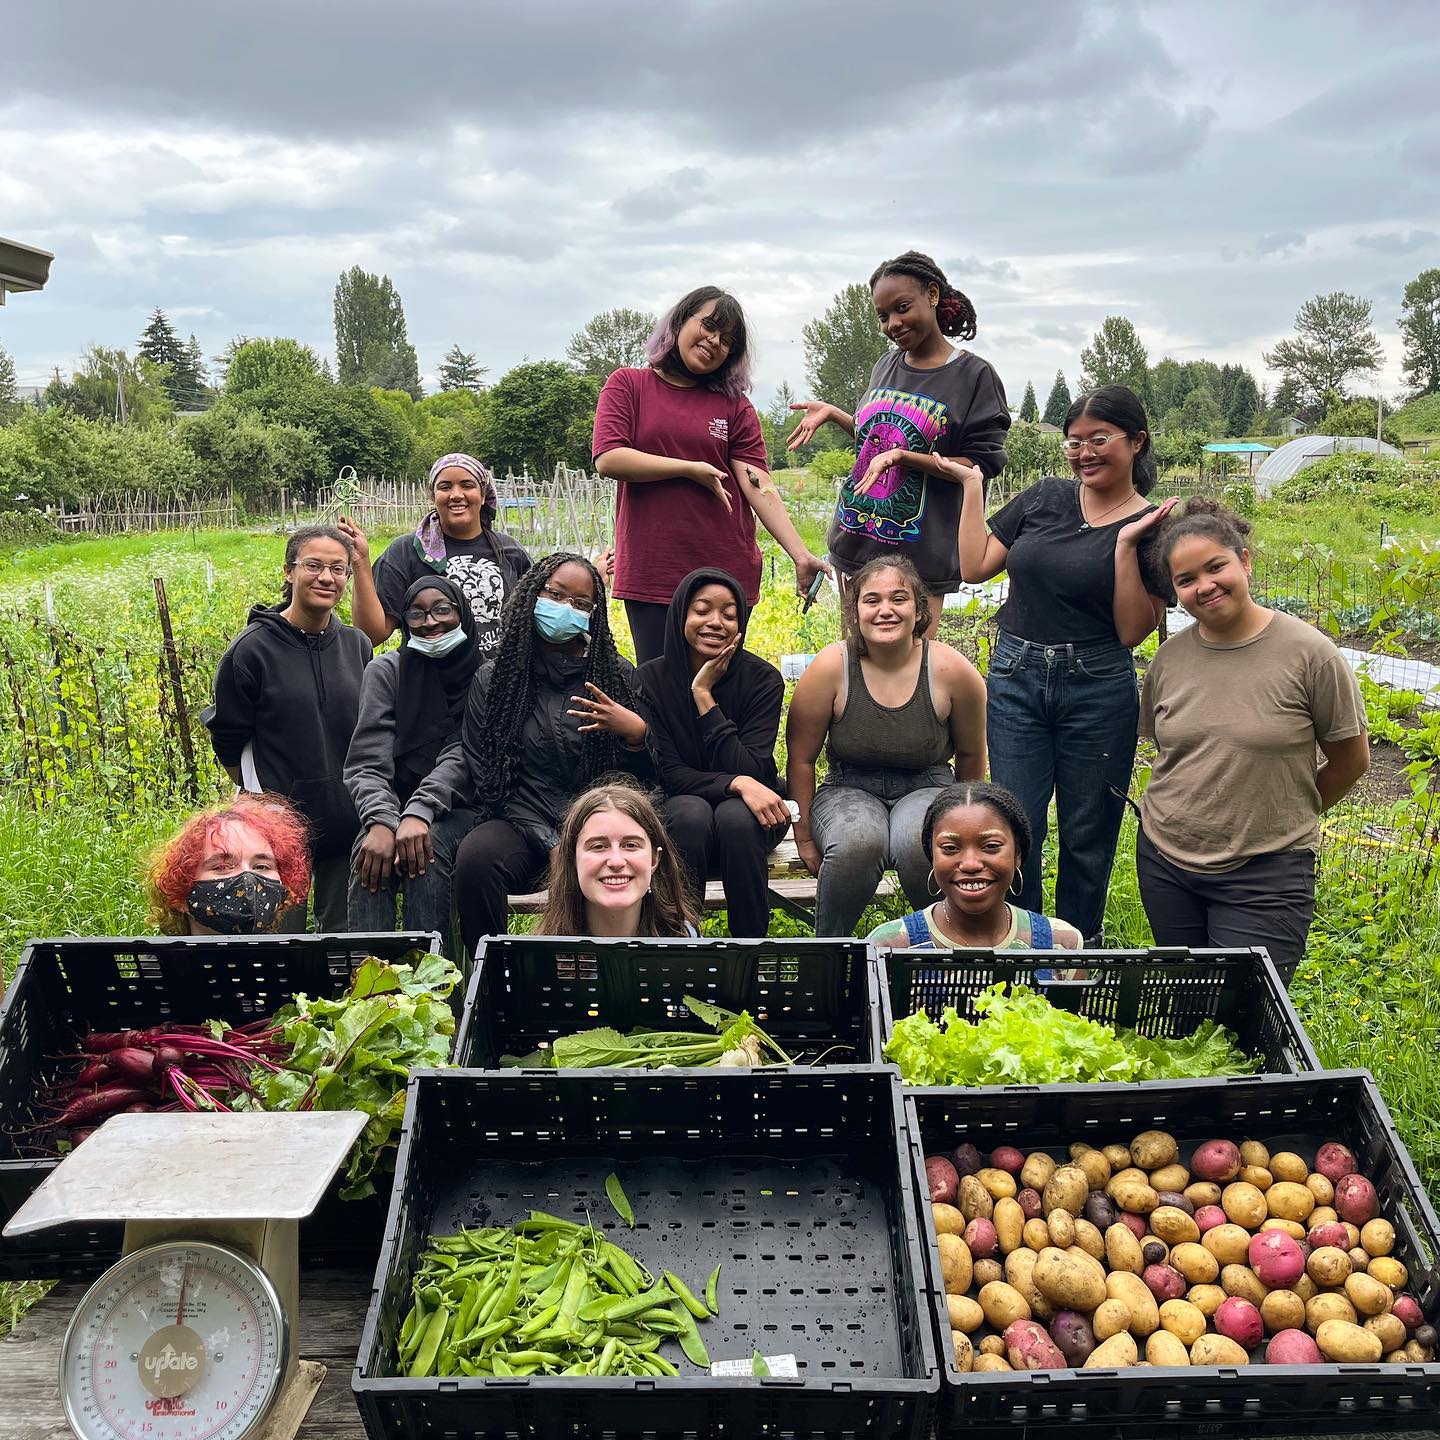 racially diverse group of youth standing in a farm, posing behind a harvest of vegetables